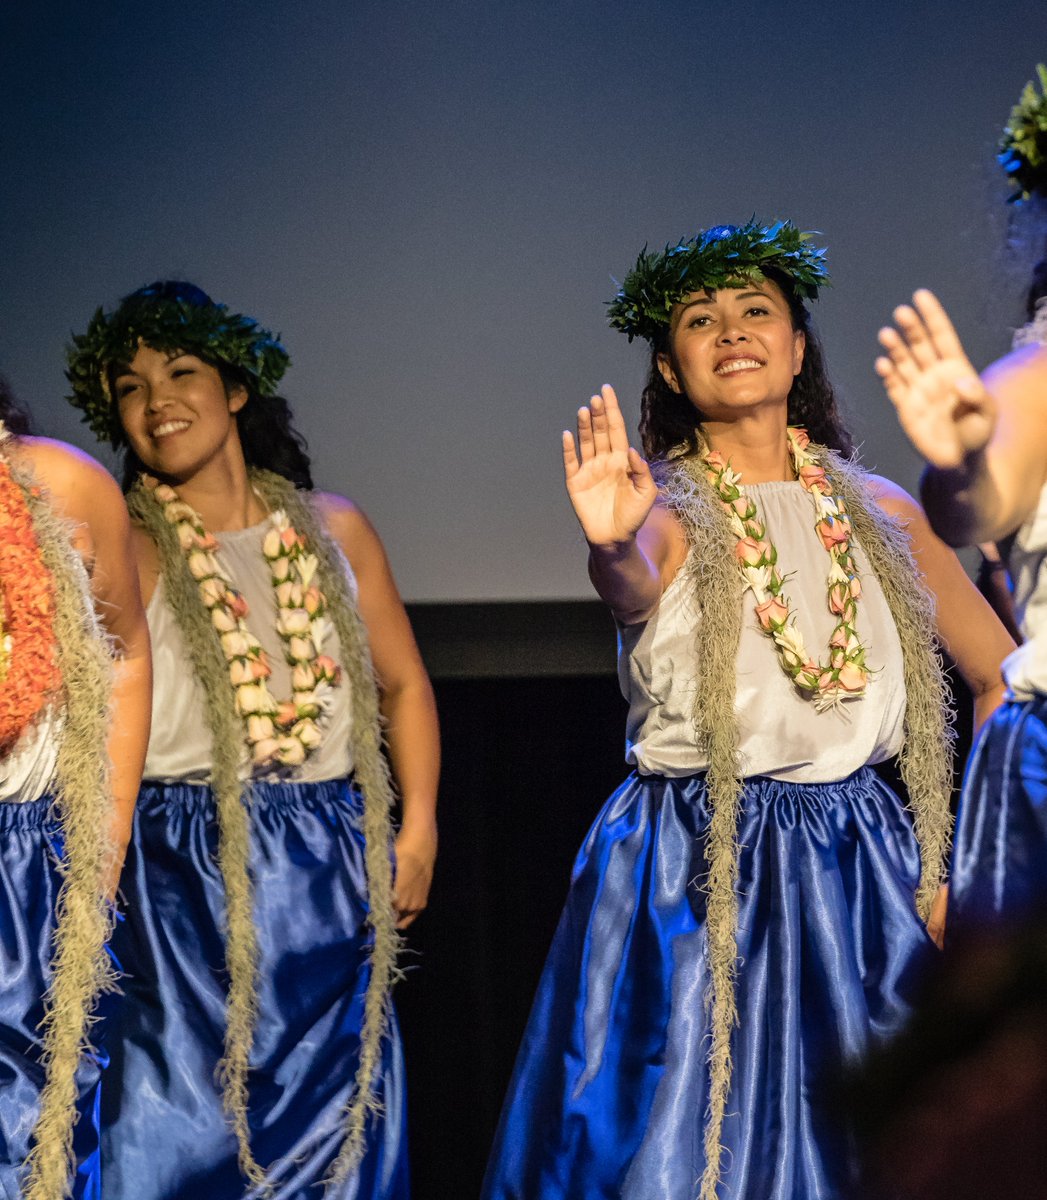 You worked so hard and your going to do great at your performance today honey!  (Lets just hope I can pull off my job and get the good photos!) #Sony #SonyA7III #SigmaArt #SonyGmaster #Hula #Dance #Performance